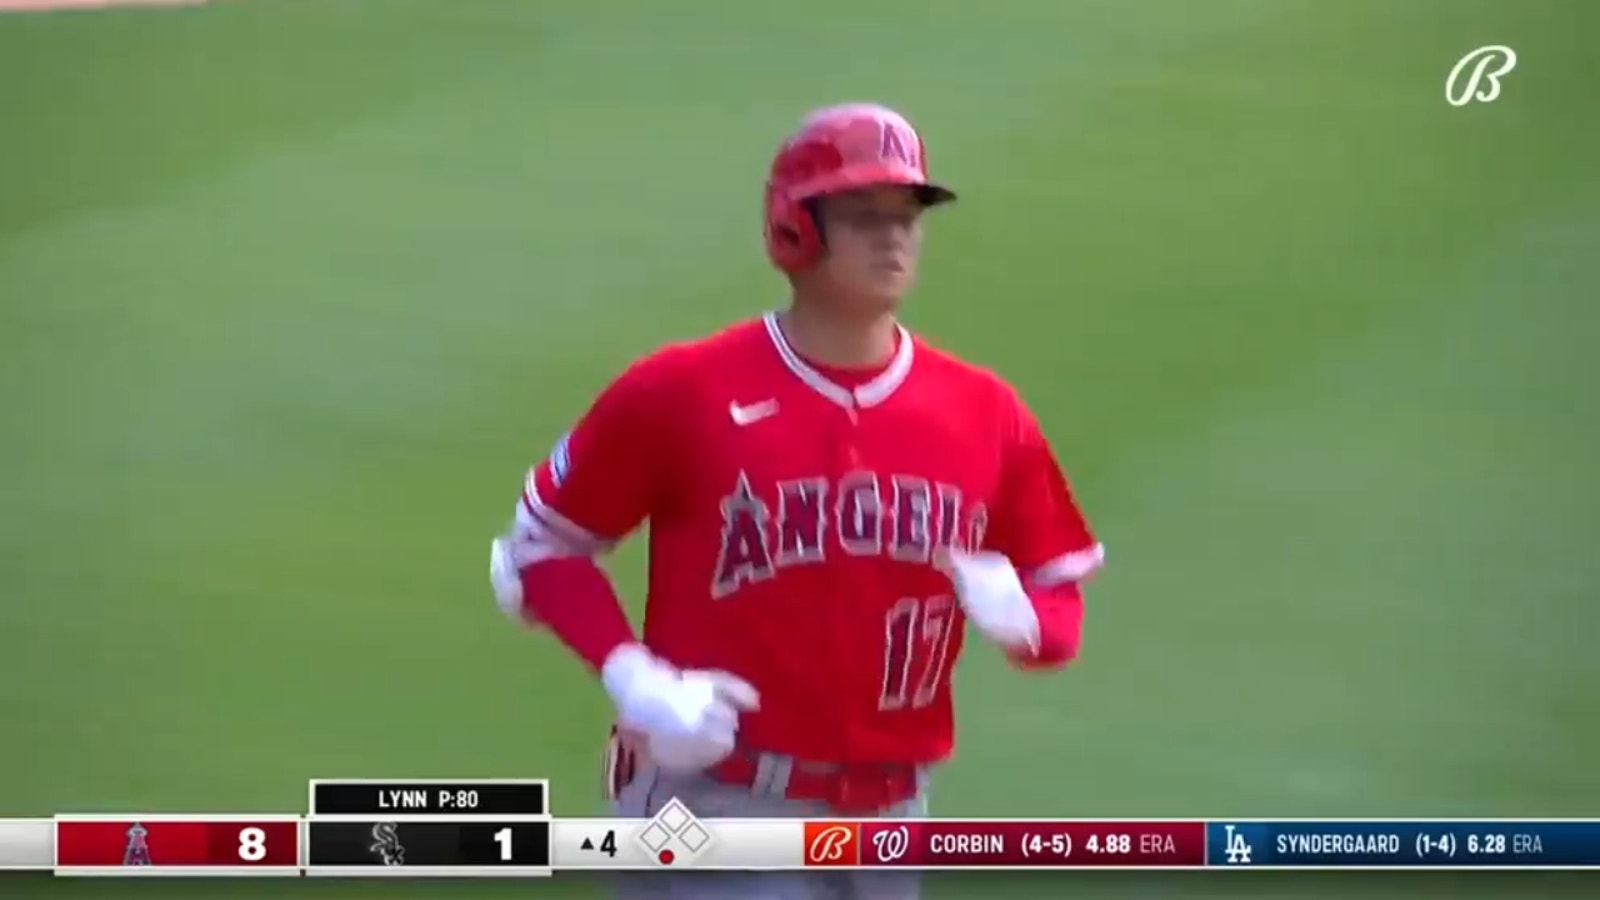 Shohei Ohtani delivers his second home run of the day